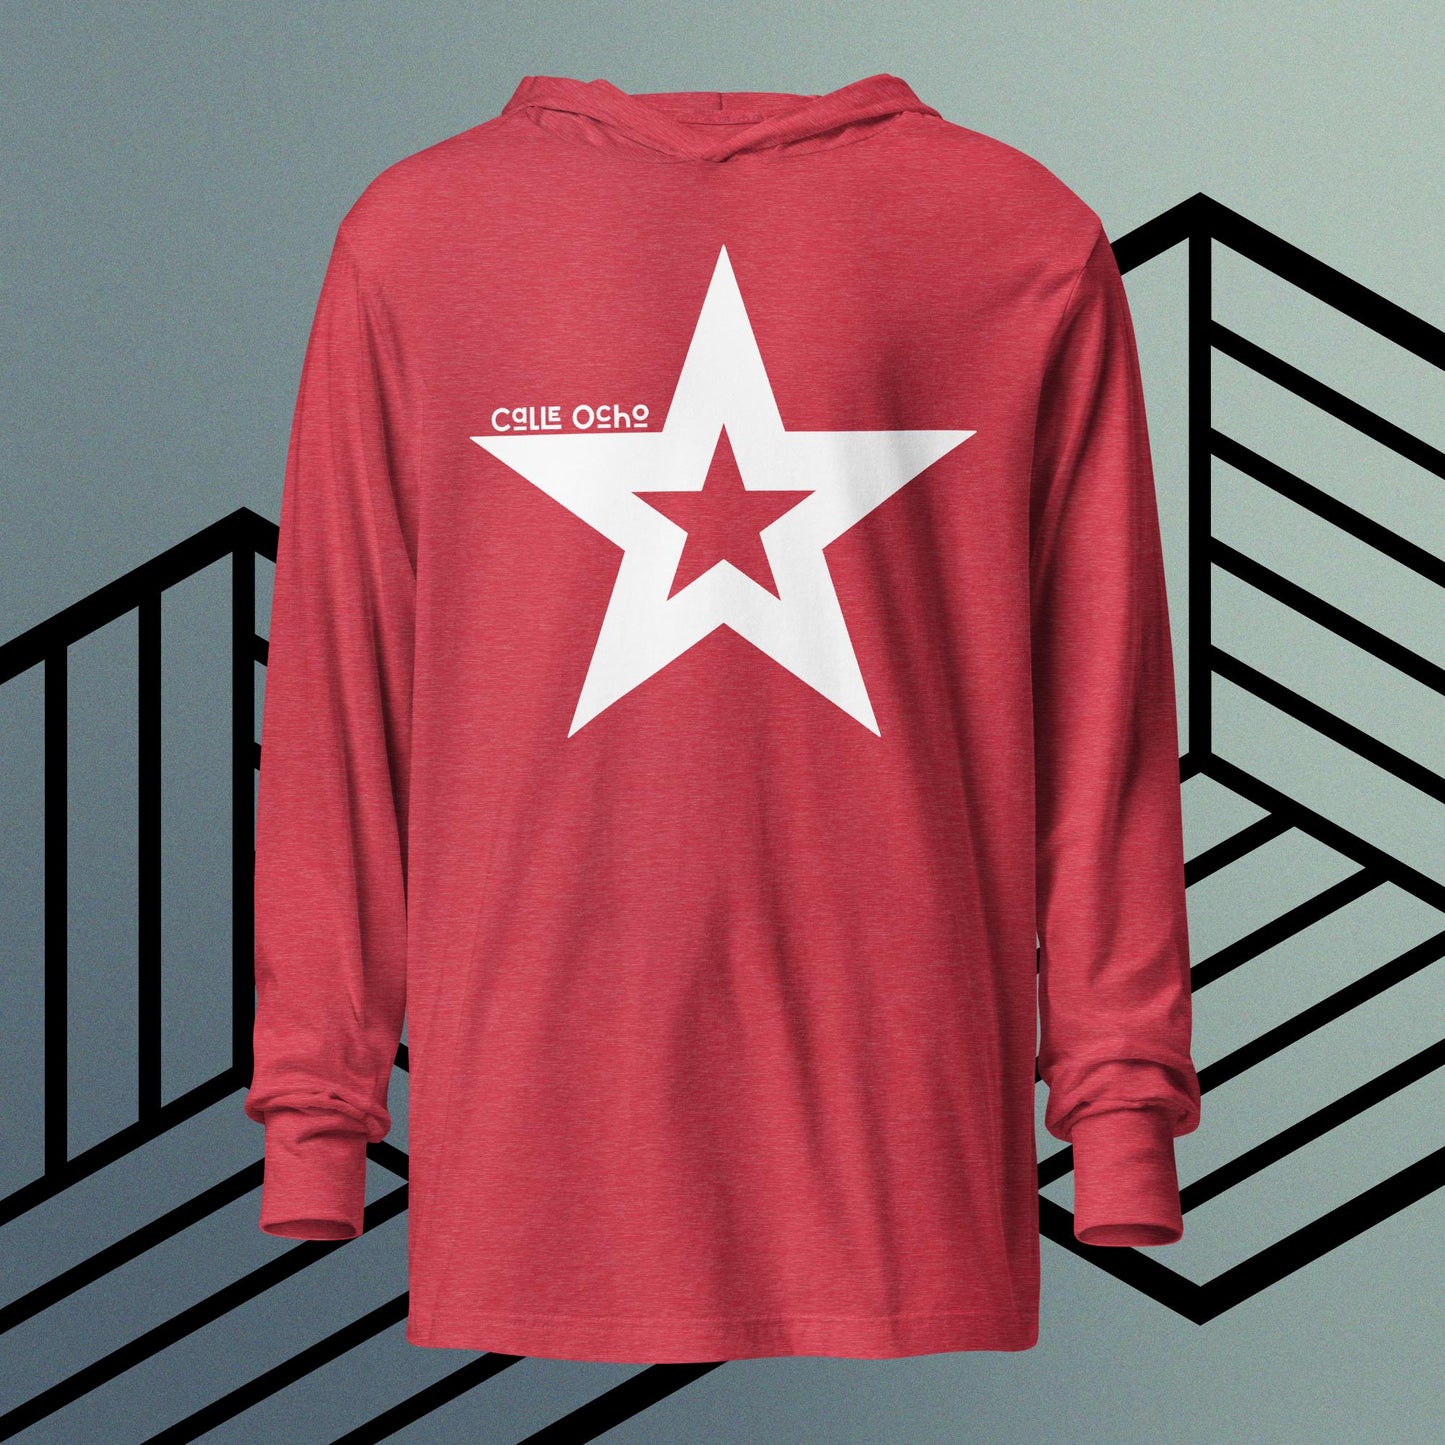 The new Rock Star hooded T